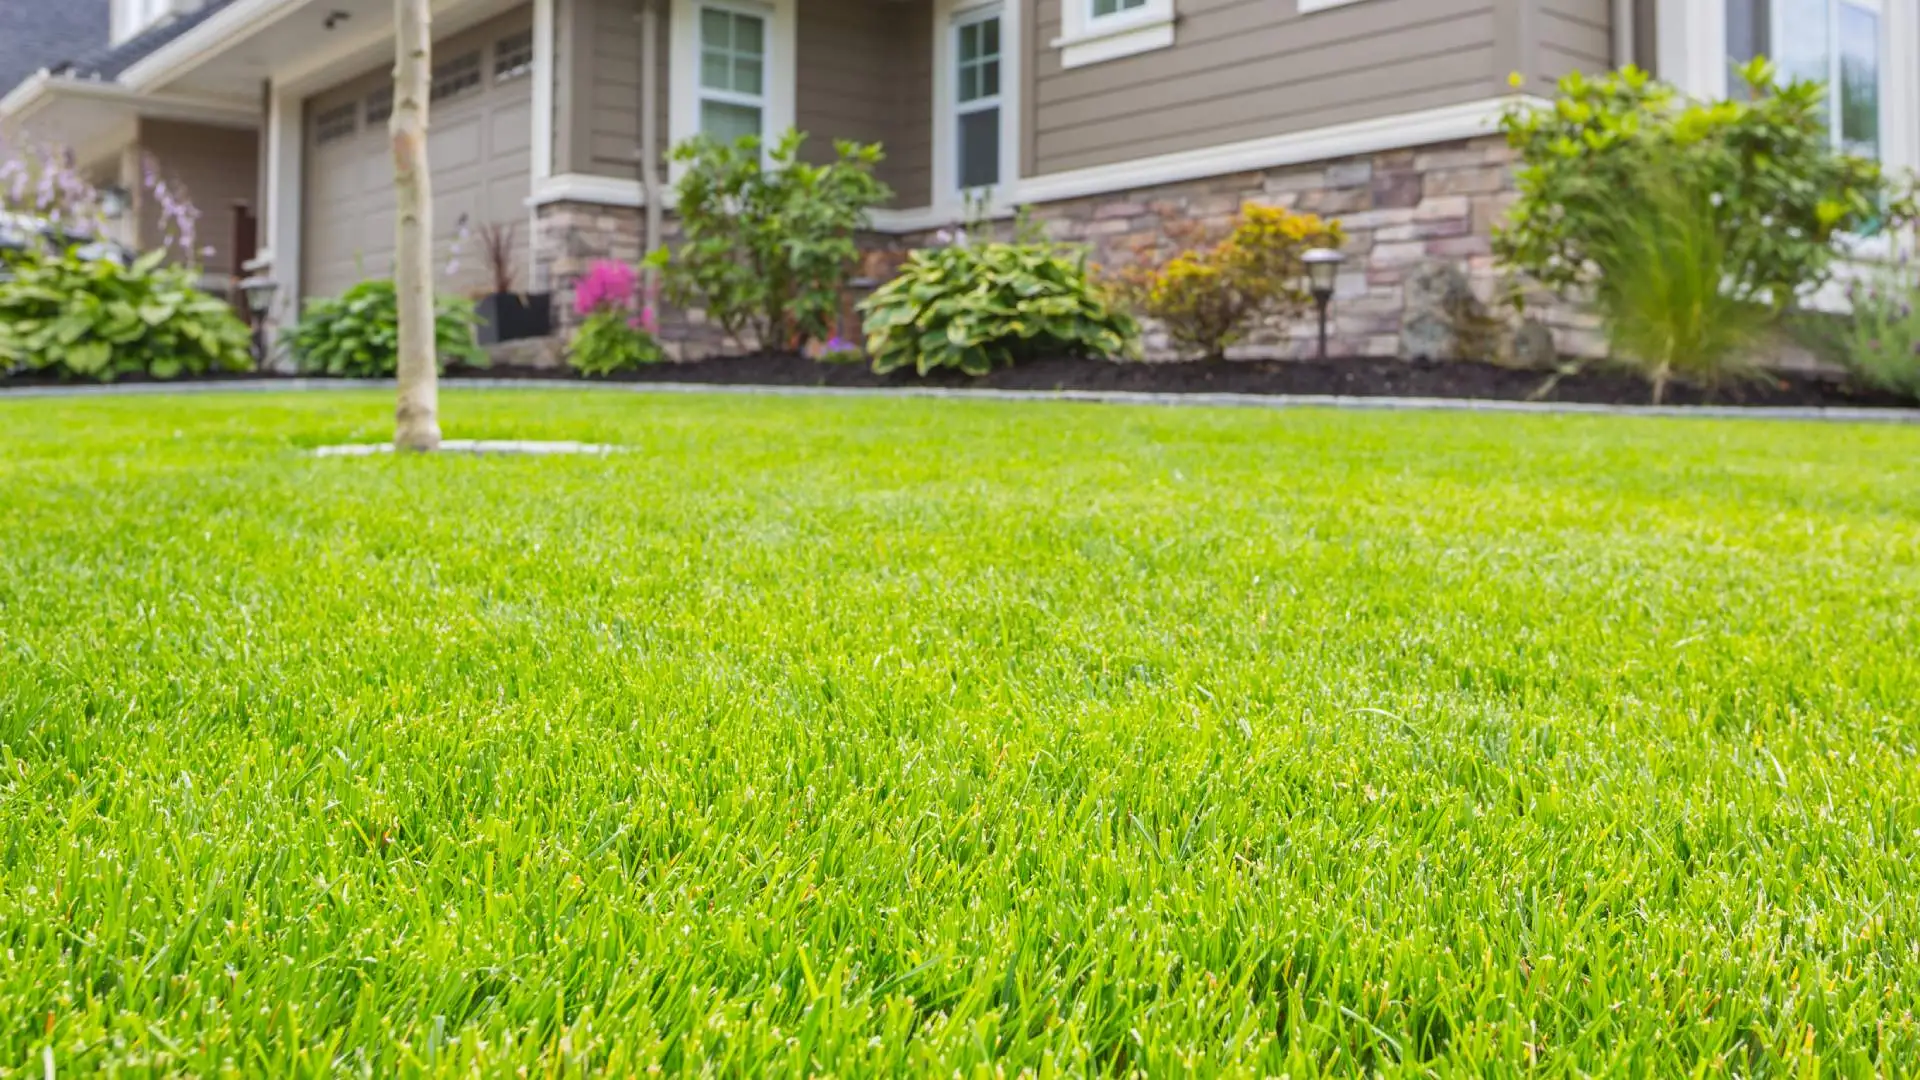 3 Mistakes to Avoid While Seeding Your New Lawn